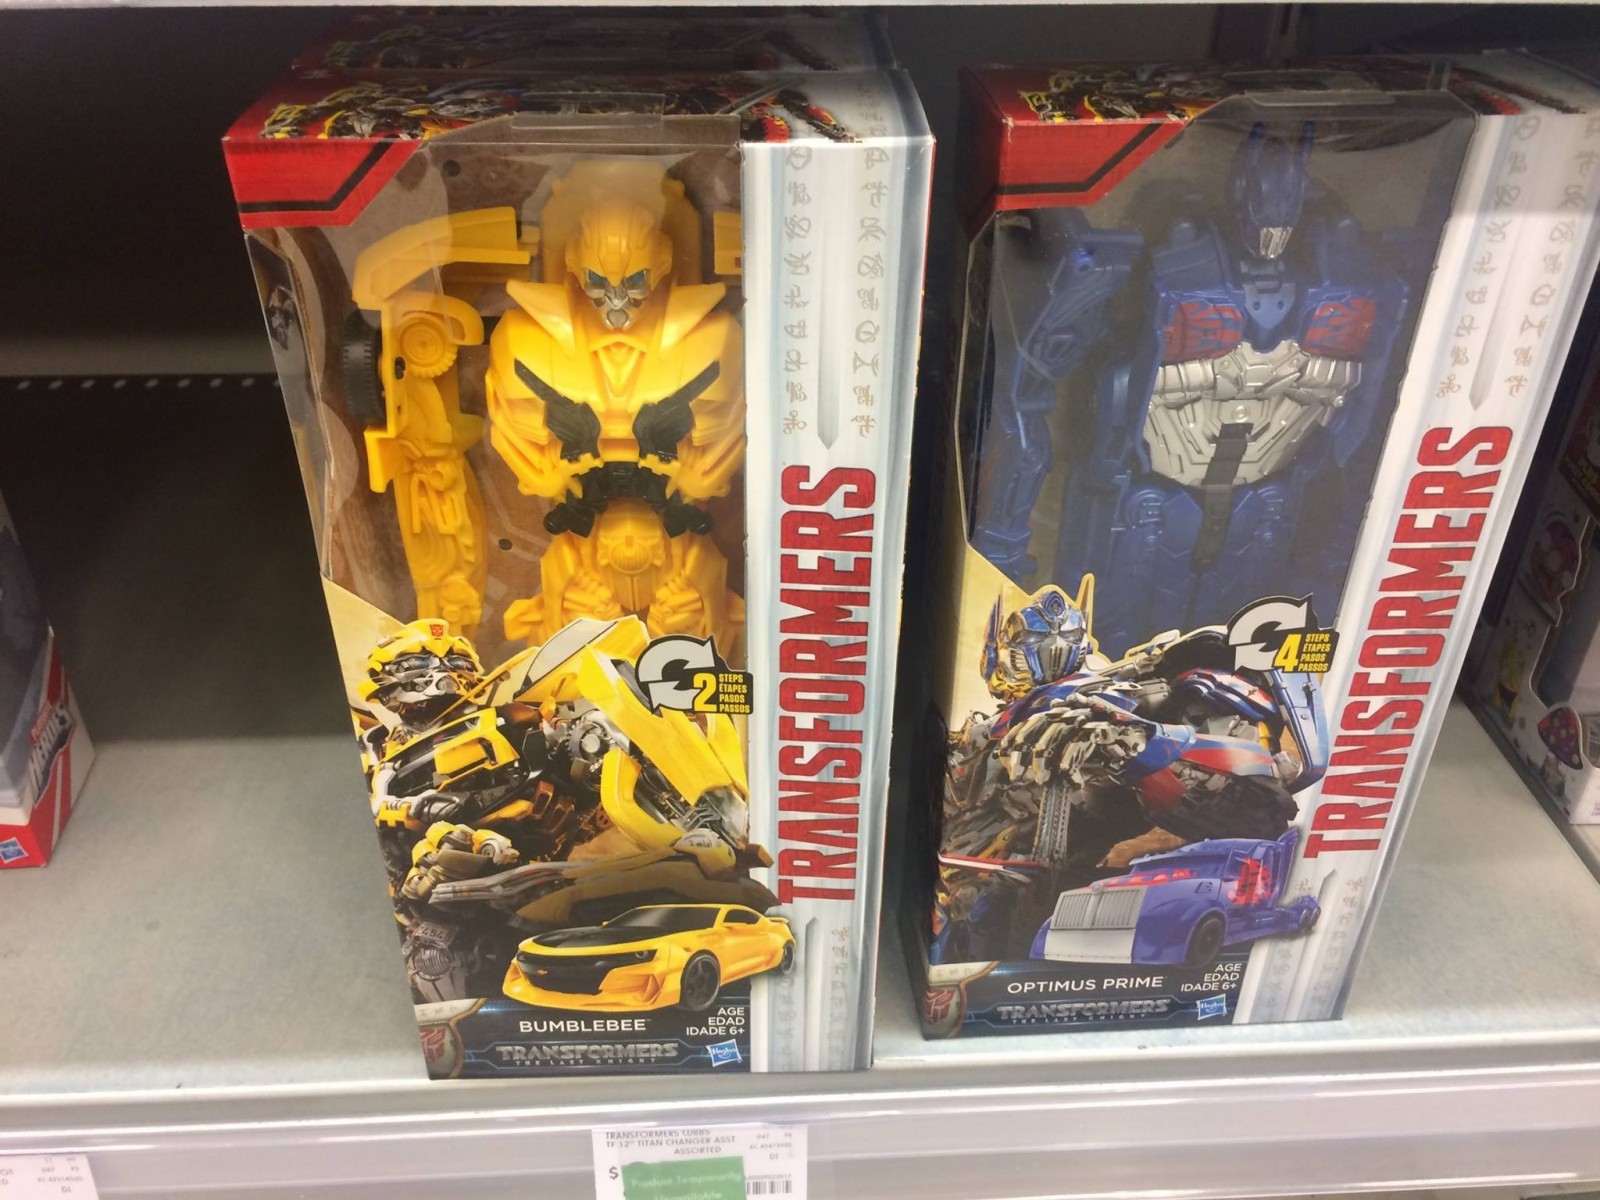 Transformers News: Transformers: The Last Knight Toys Sighted at Australian Retail